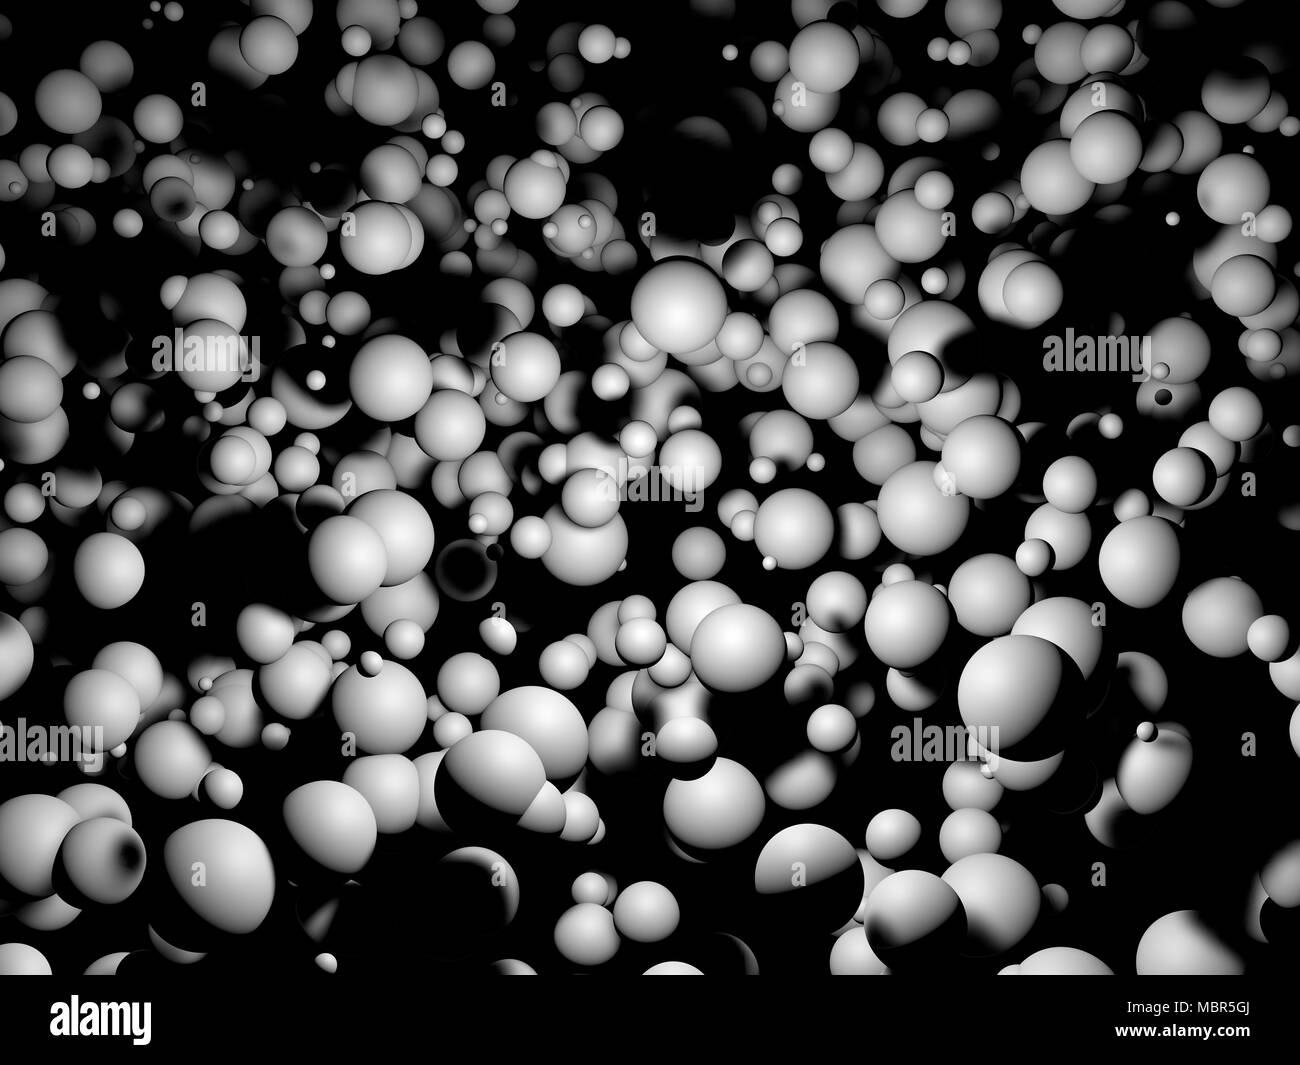 3d rendering of white spheres on a dark background Stock Photo